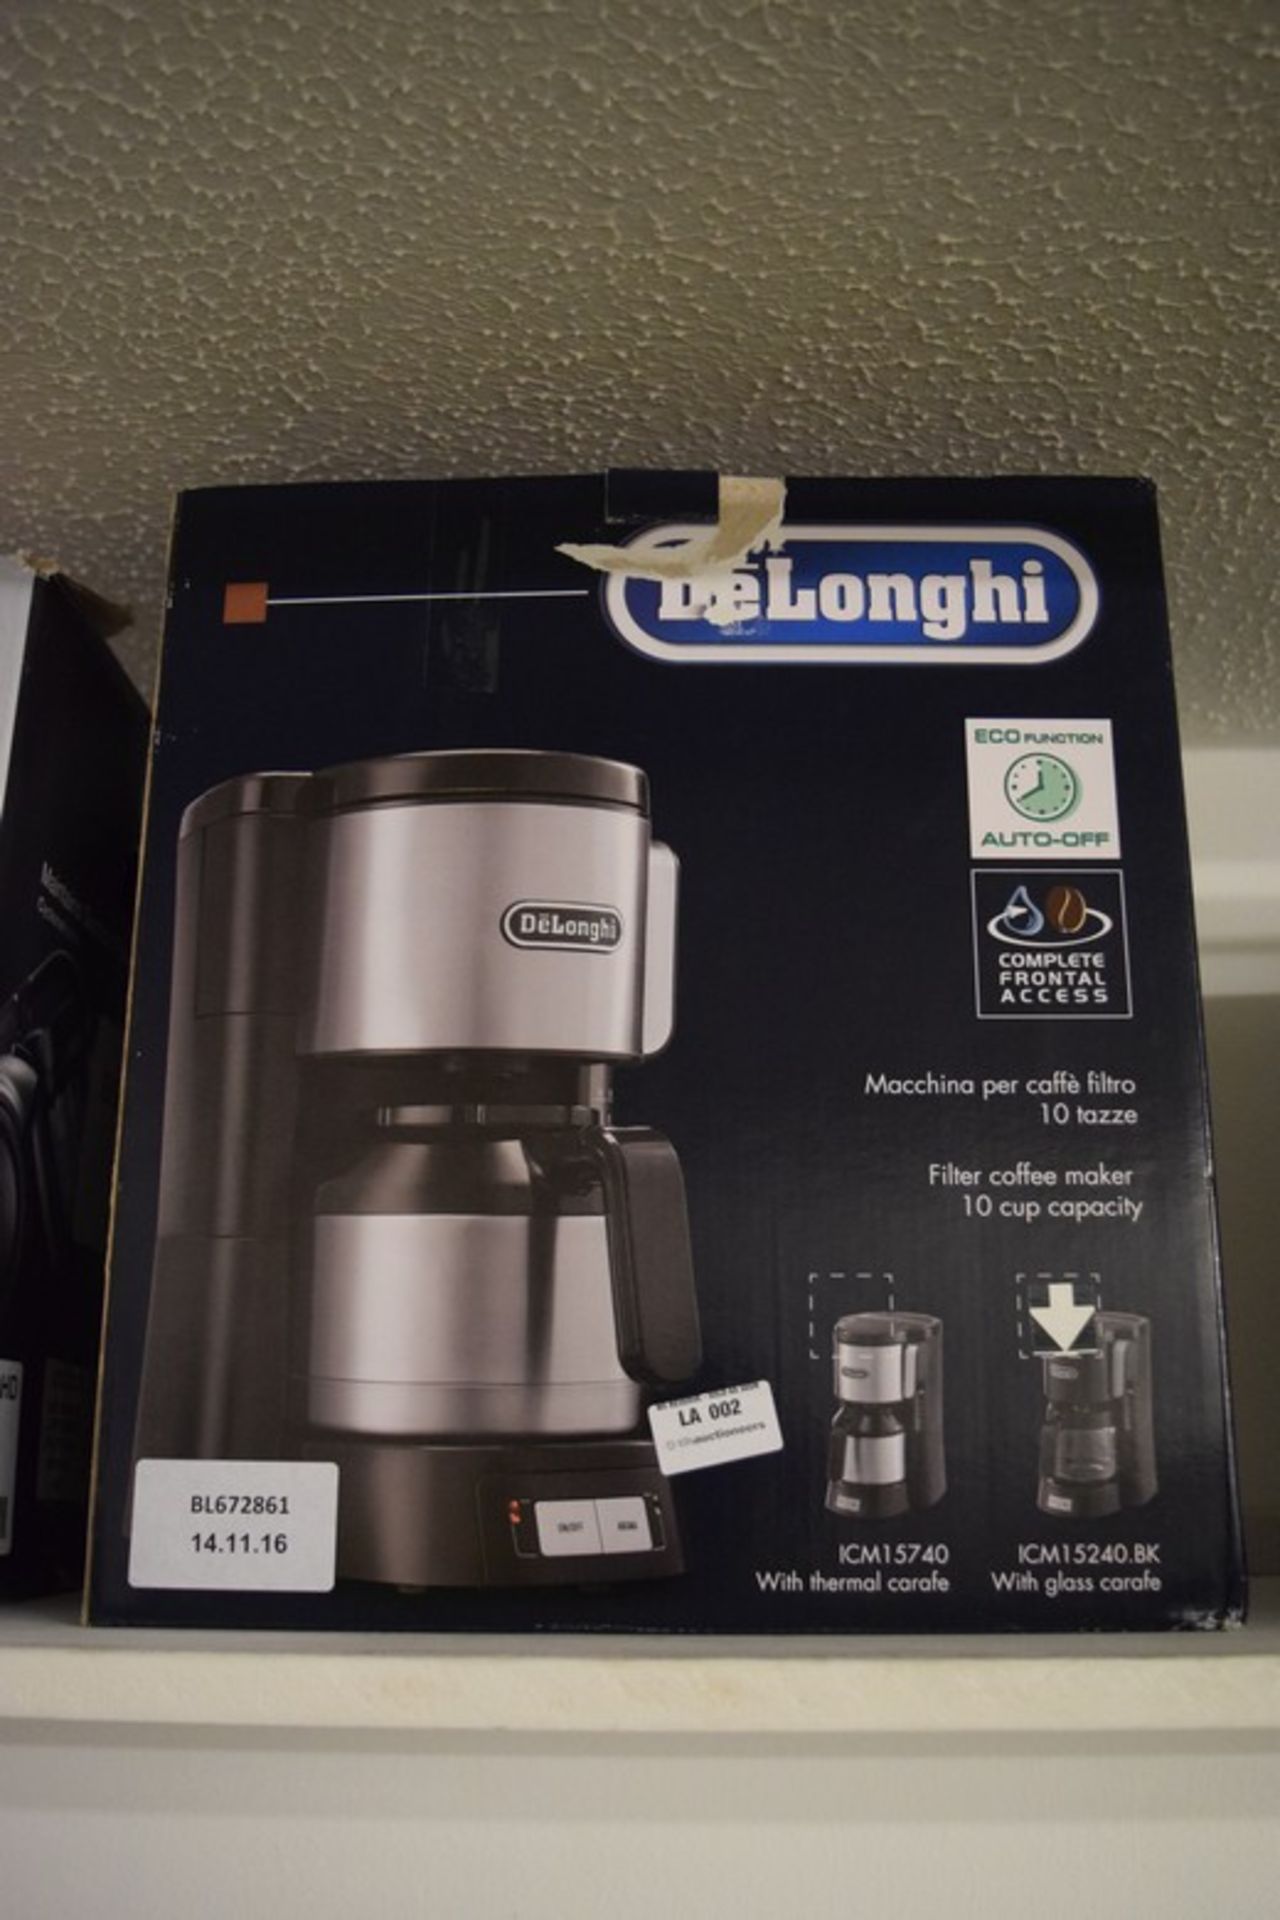 1 x BOXED DELONGHI FILTER COFFEE MAKER WITH 10-CUP CAPACITY RRP £40 (14.11.2016) *PLEASE NOTE THAT